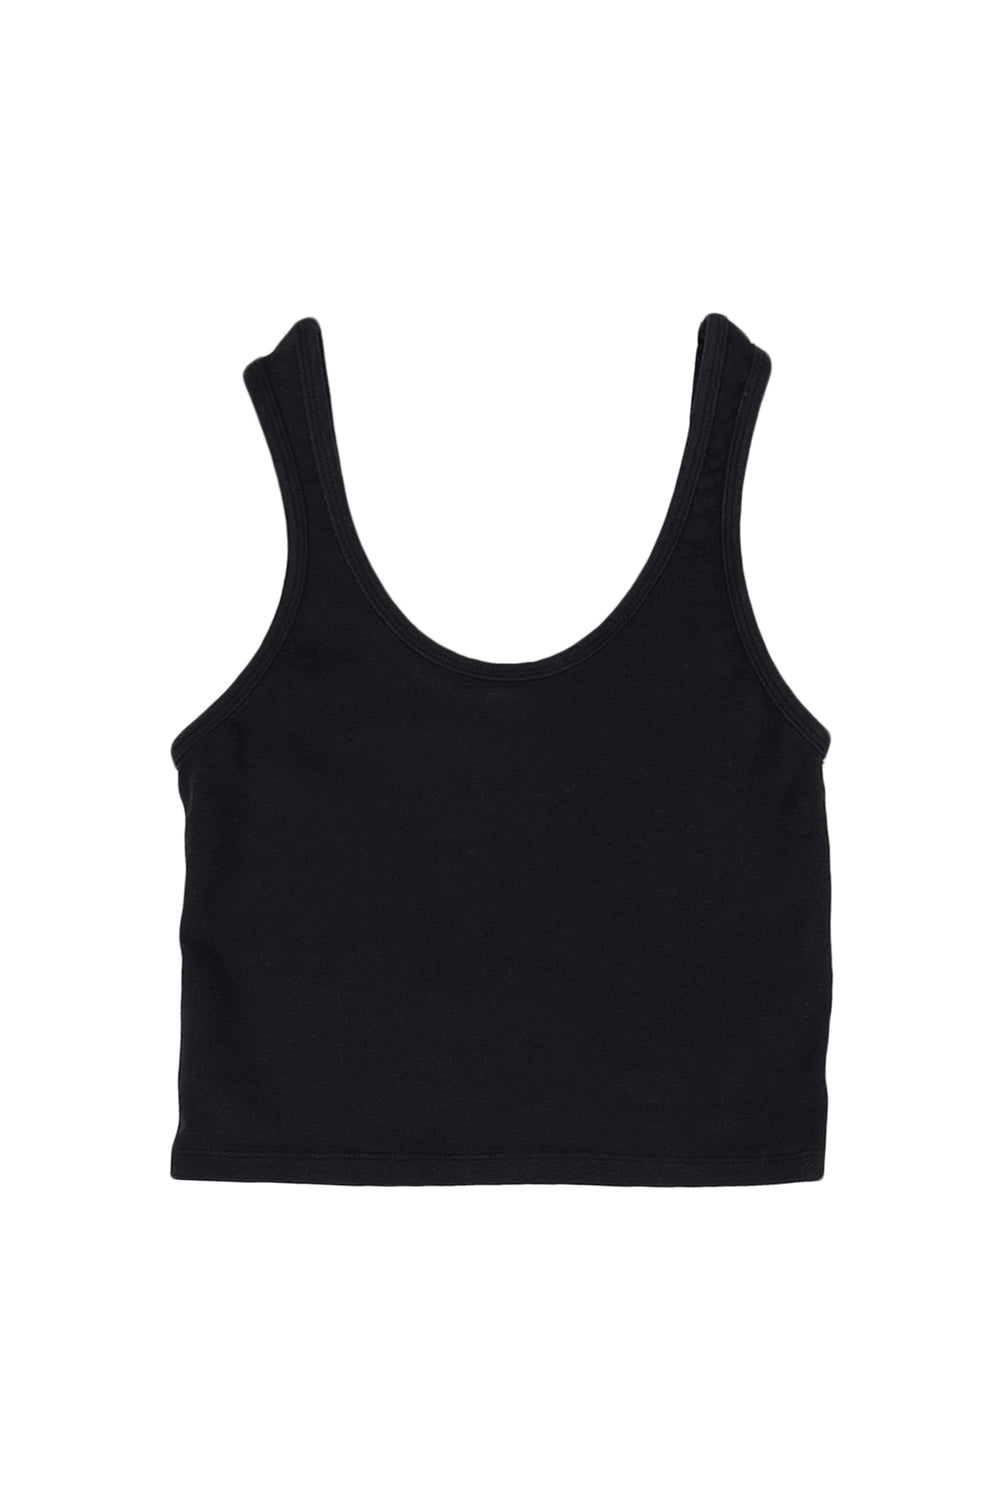 A sporty tank built from a soft and breathable hemp blend with the perfect amount of stretch. Sturdy, but minimal shape is engineered to ensure confident coverage for an active lifestyle. Sustainably made.